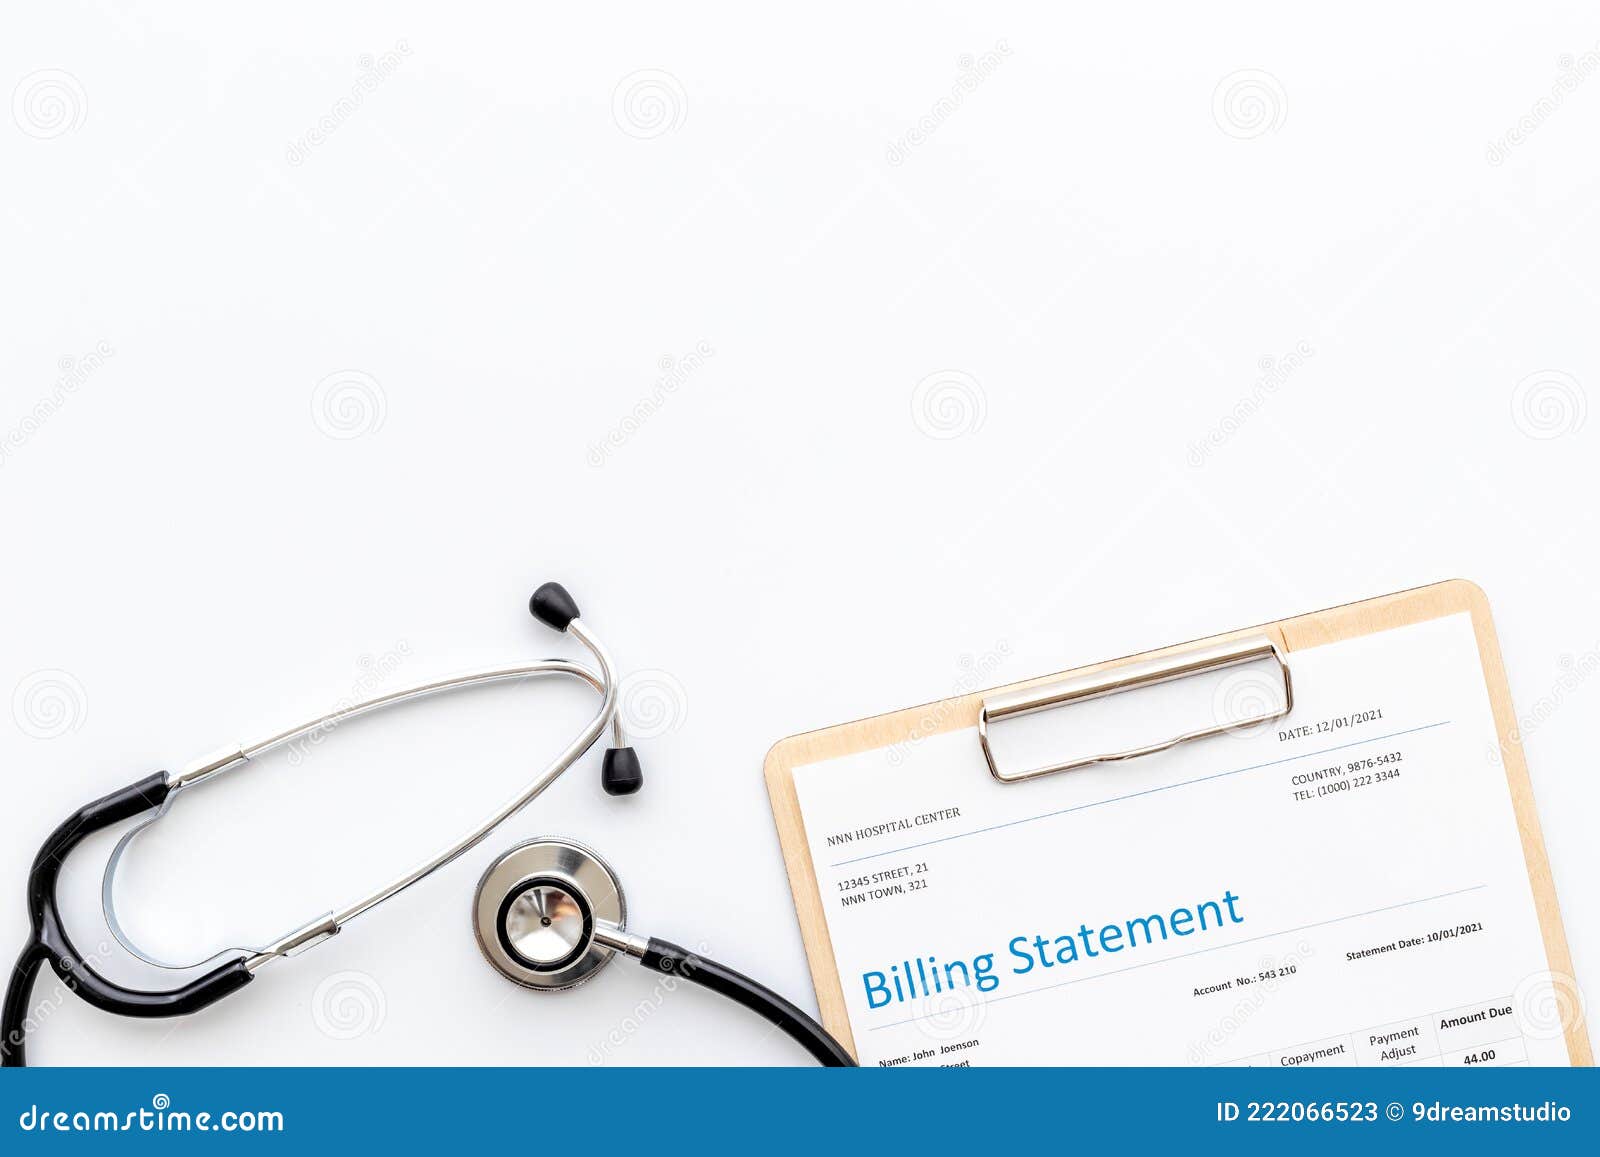 stethoscope with medical billing statement. top view